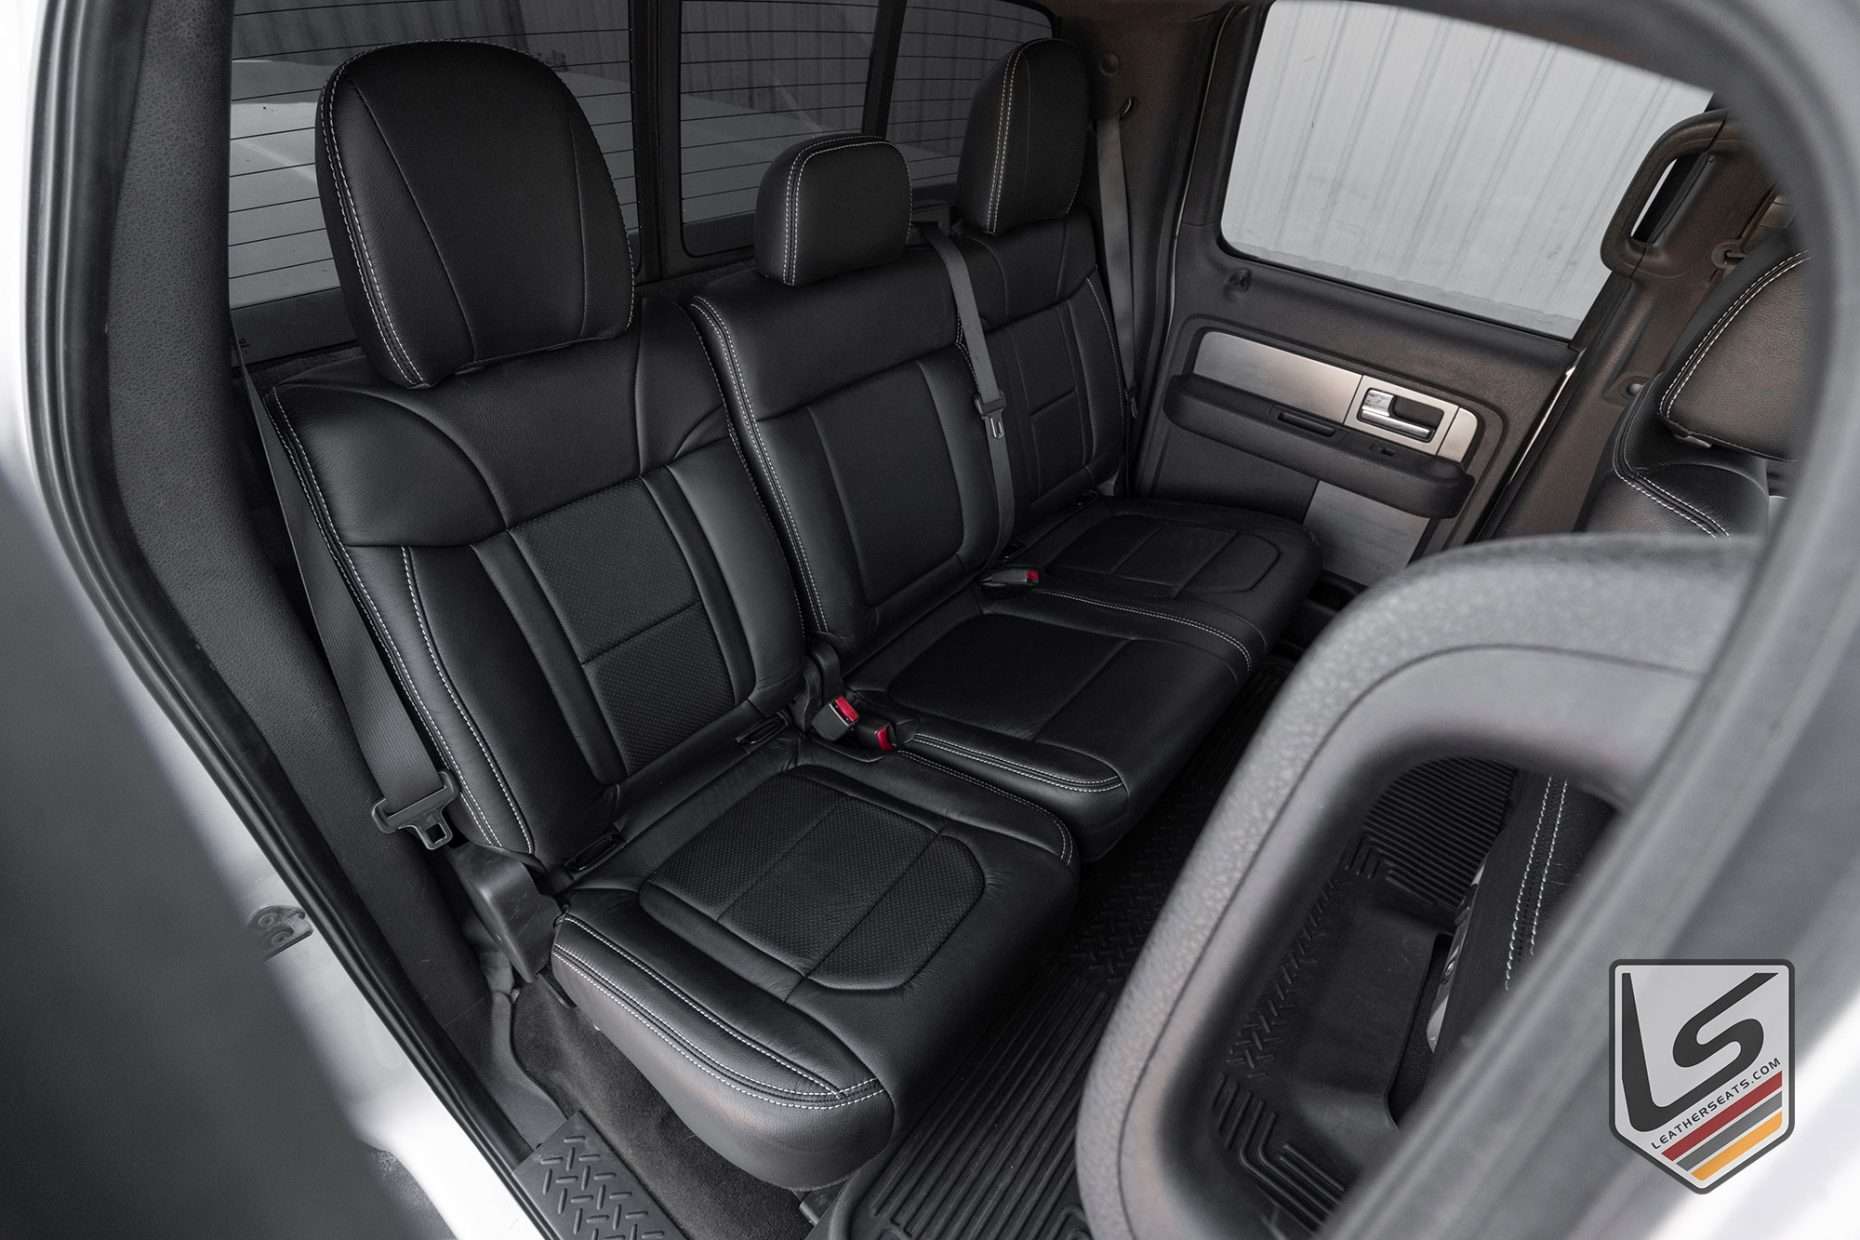 2012-2014 Ford Raptor SuperCrew with custom Black perforated leather seats - LS Gallery